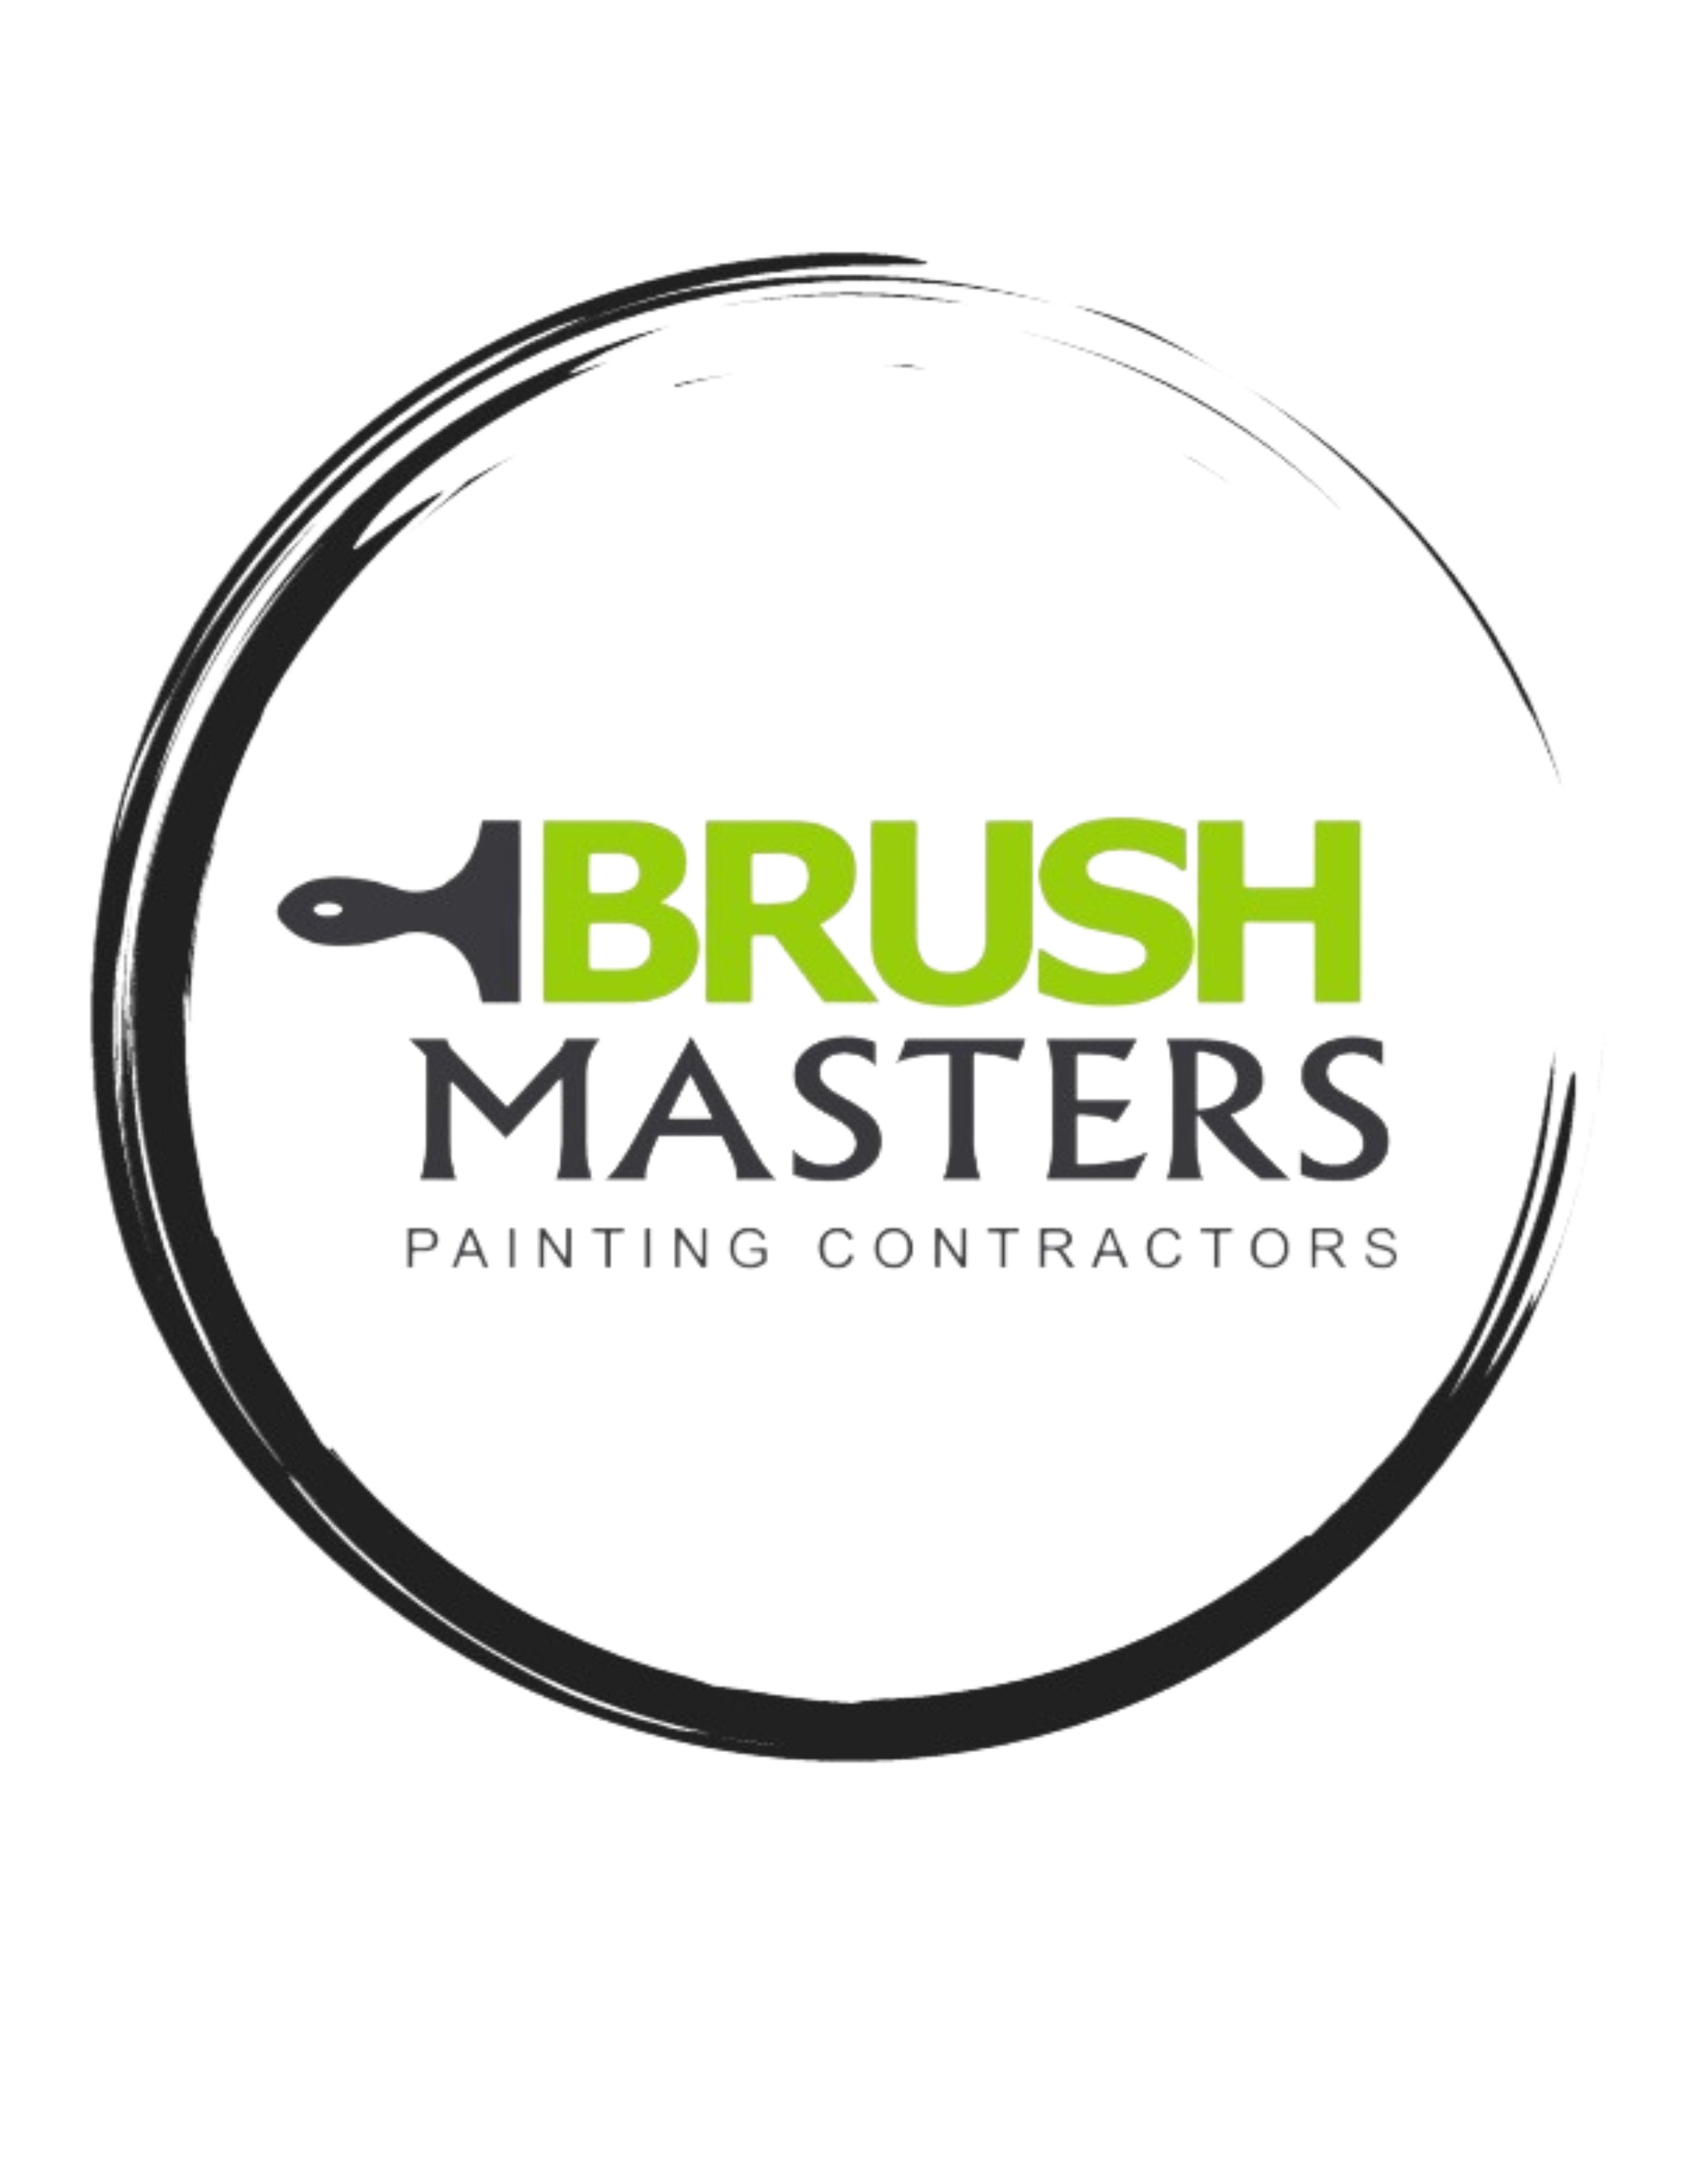 Brush Masters Painting Contractors of Houston Logo